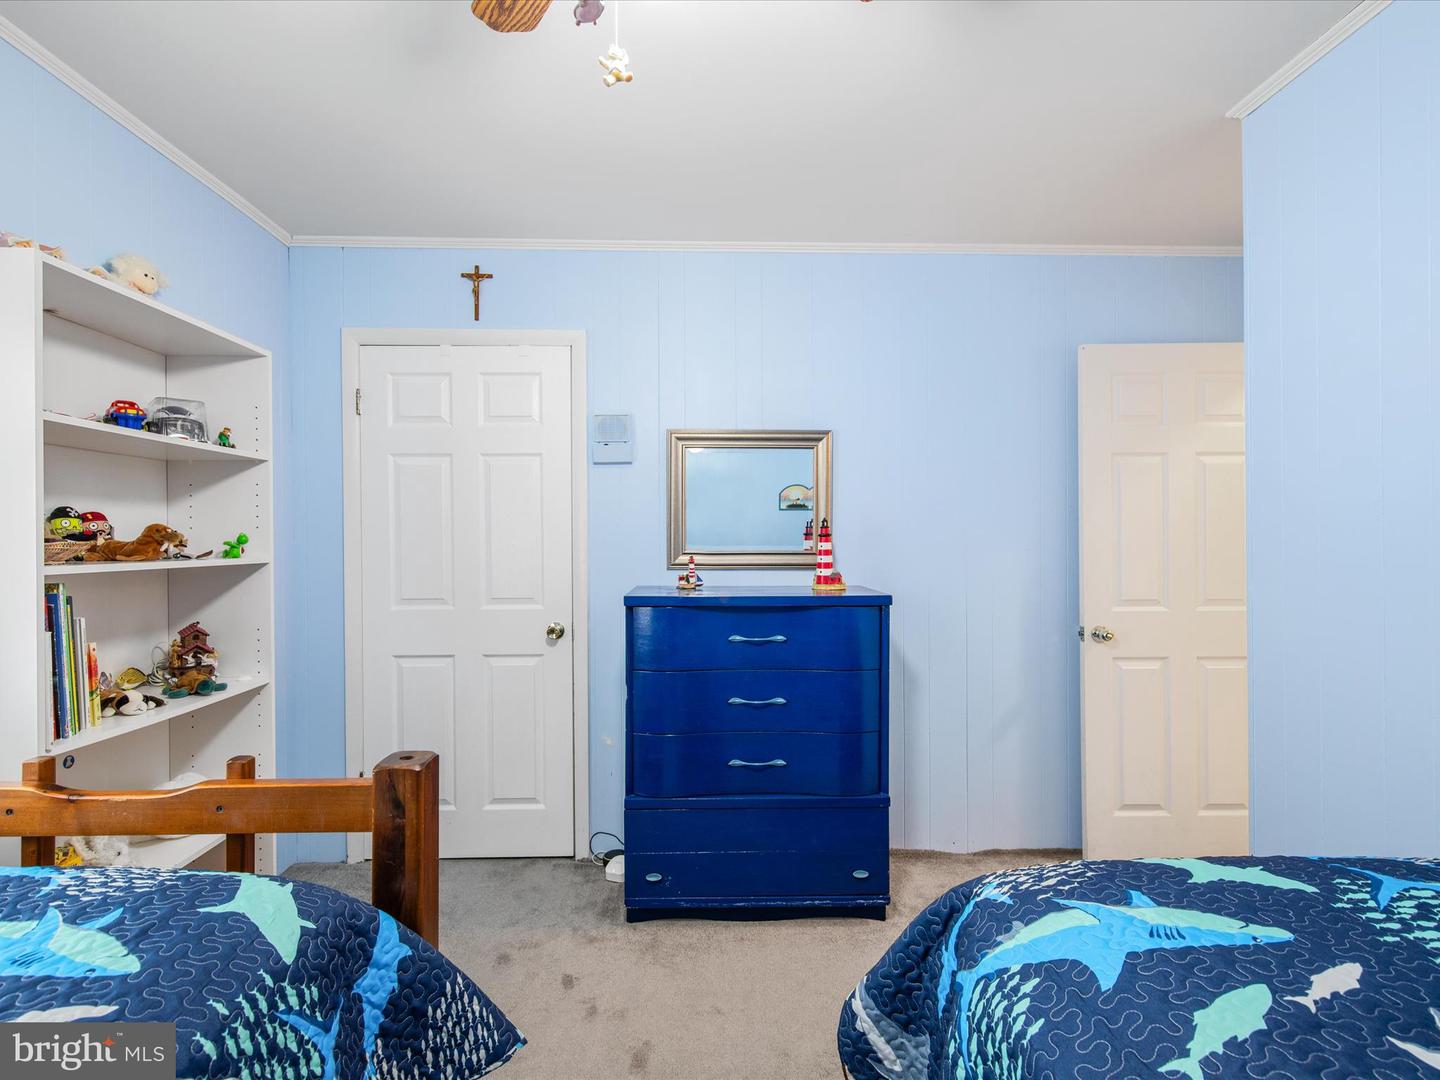 MDWO2019272-802894945112-2024-03-01-08-17-39 20 Southwind Ct | Berlin, MD Real Estate For Sale | MLS# Mdwo2019272  - 1st Choice Properties